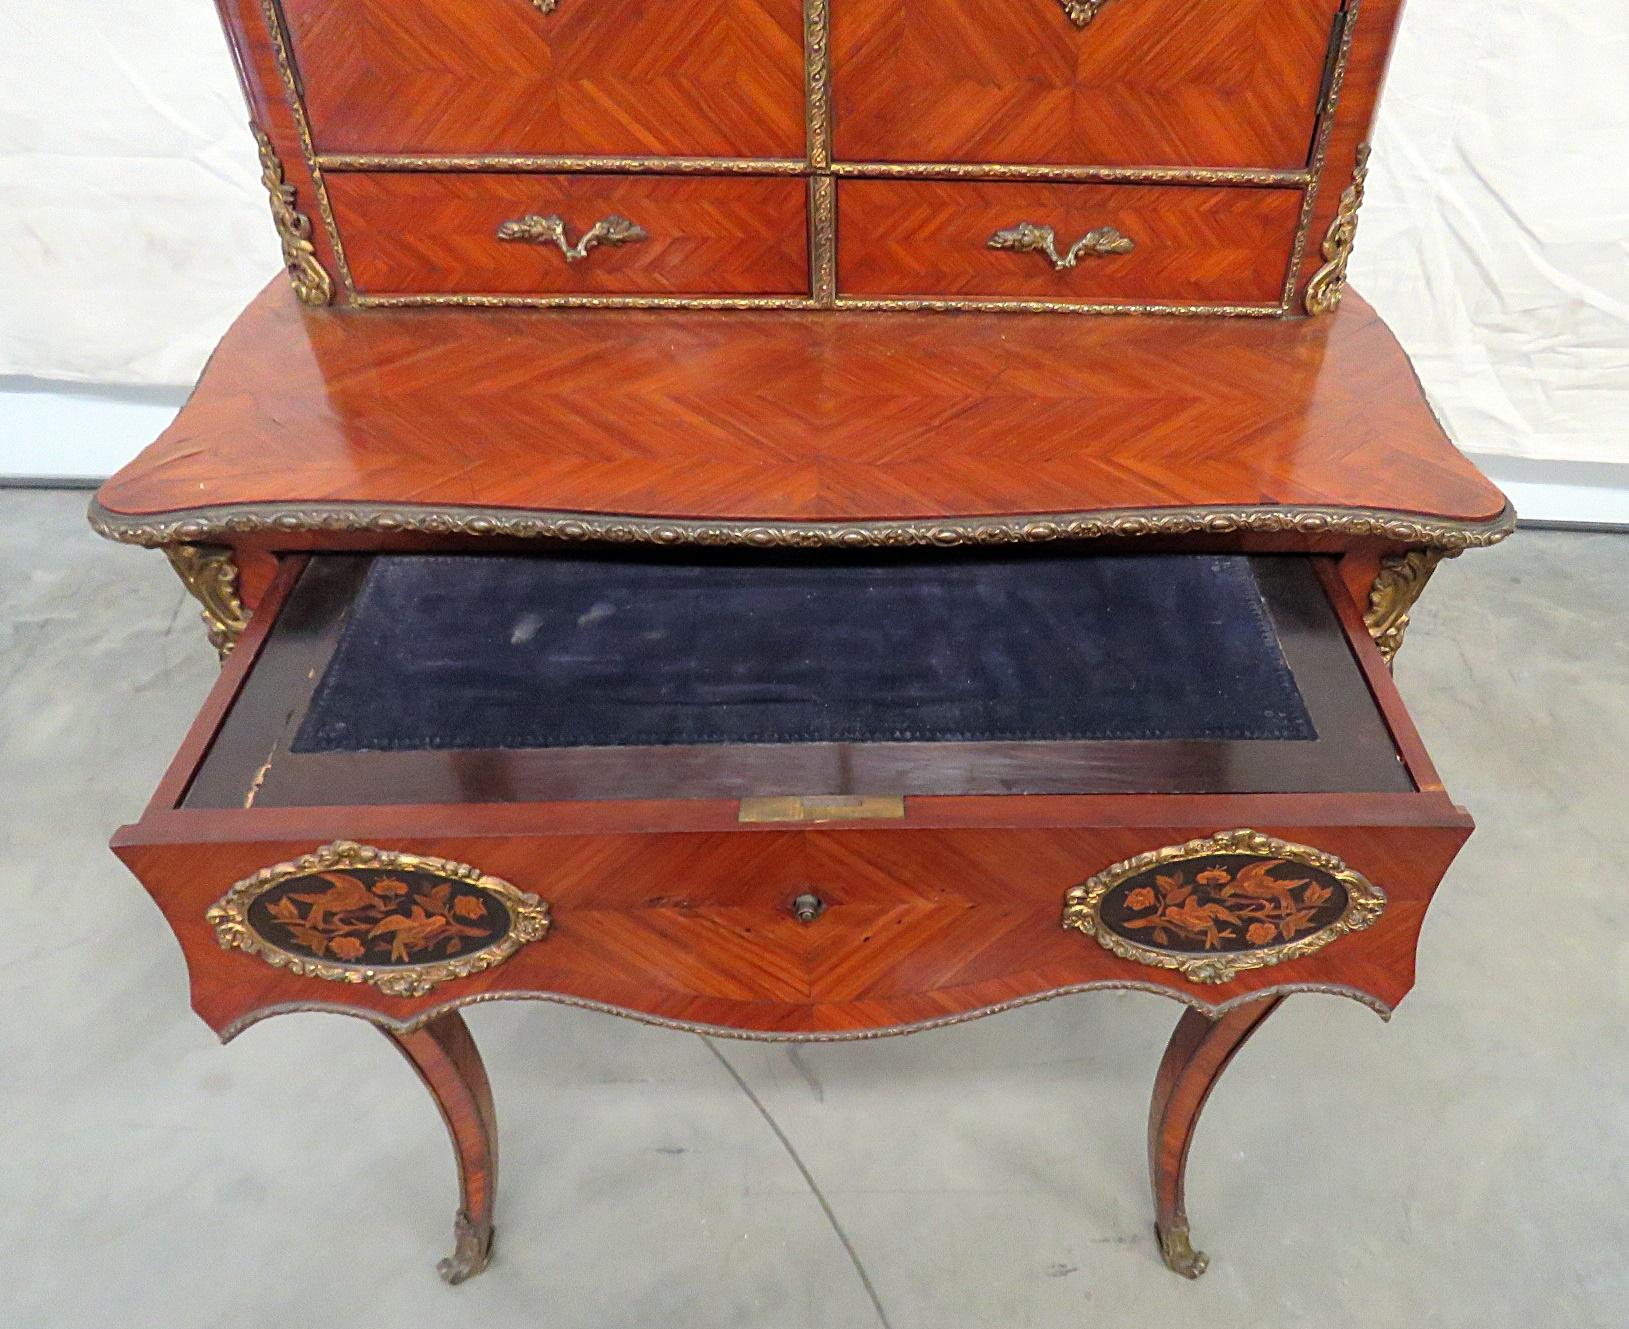 Antique C1870s French Louis XVI Style Inlaid King Wood Ladies Writing Desk 3